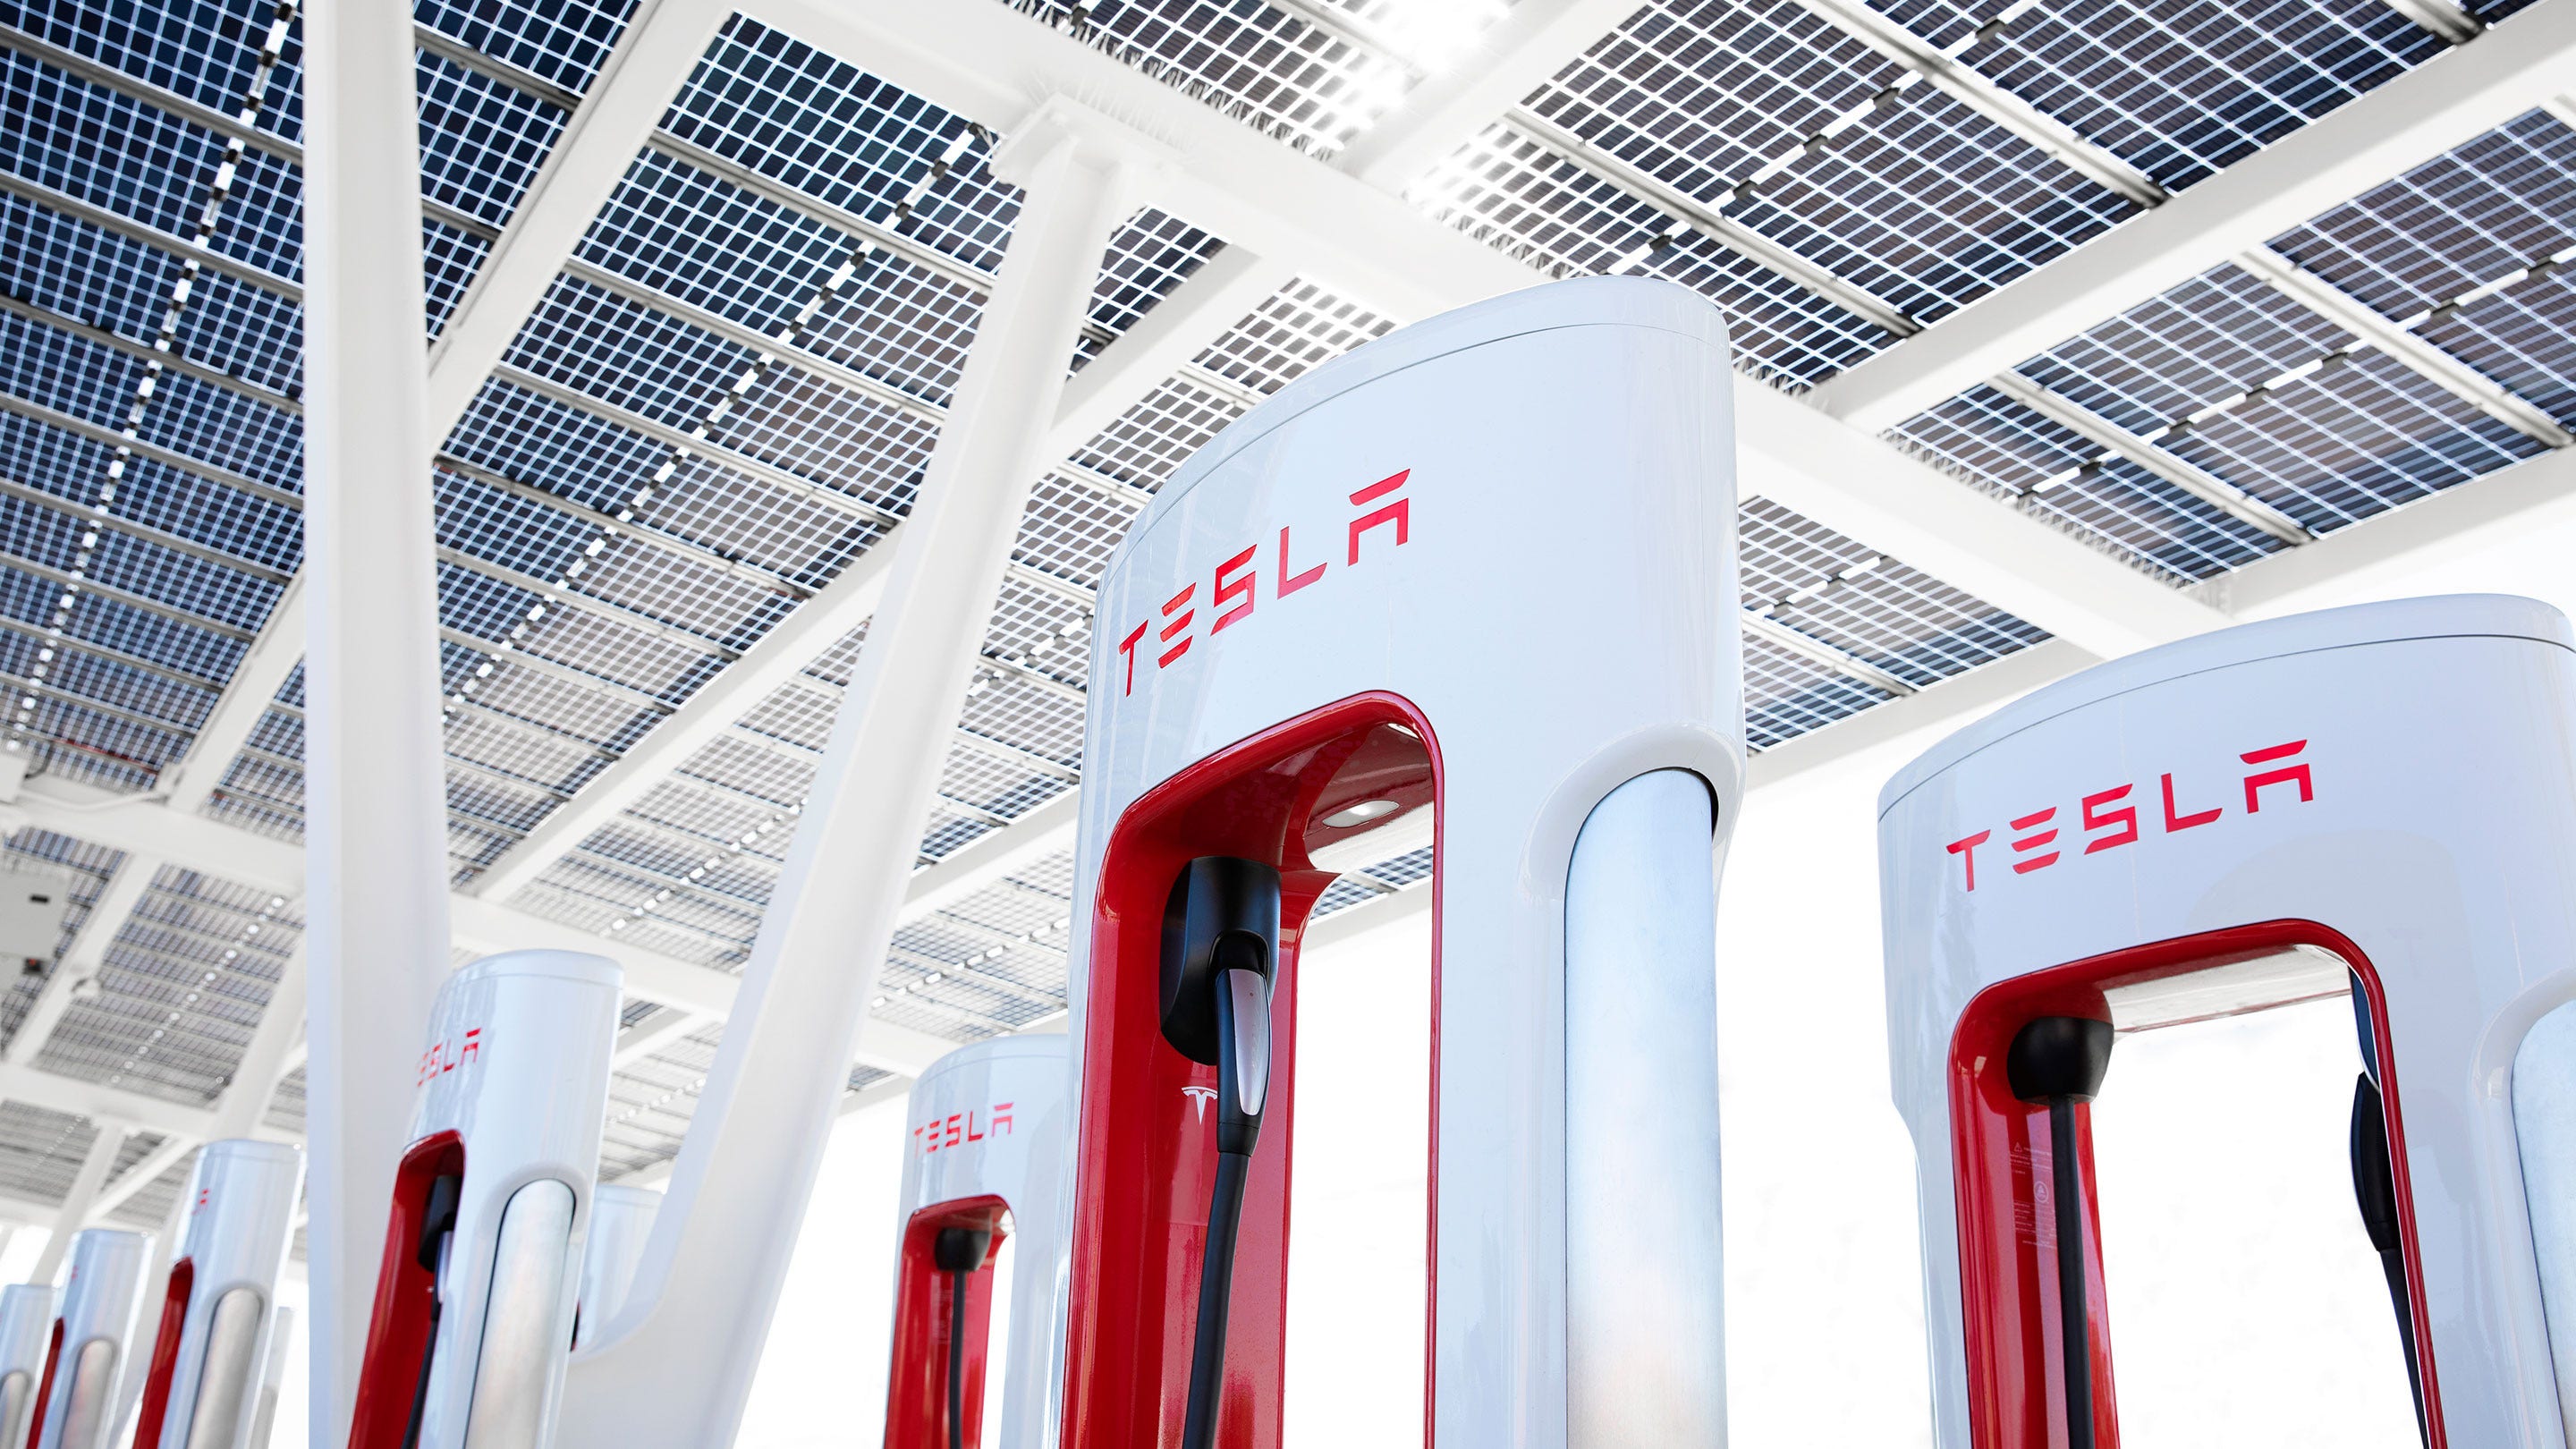 Tesla Supercharger Network Opens To Non-Tesla Owners, Here's How Much It Could Cost